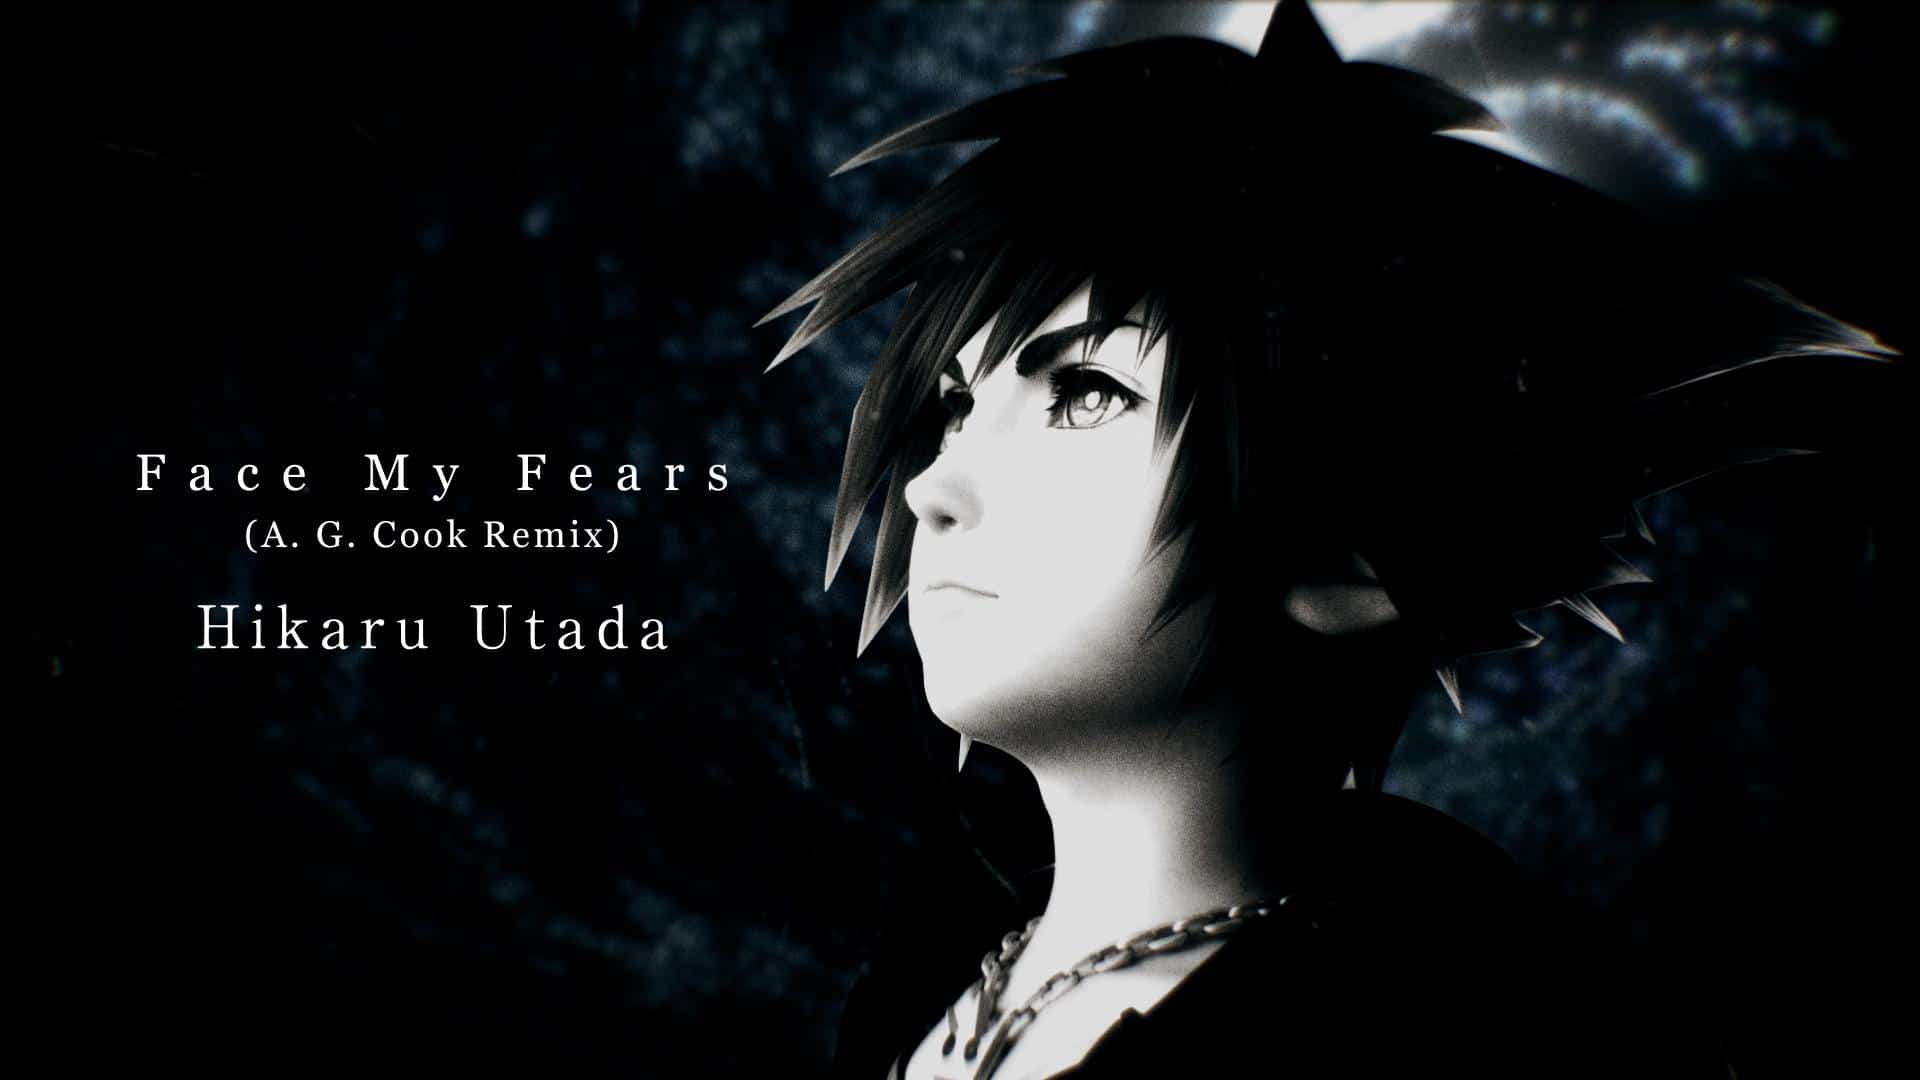 Kingdom Hearts III Opening “Face My Fears” Receiving Official A. G. Cook Remix Music Video Tomorrow